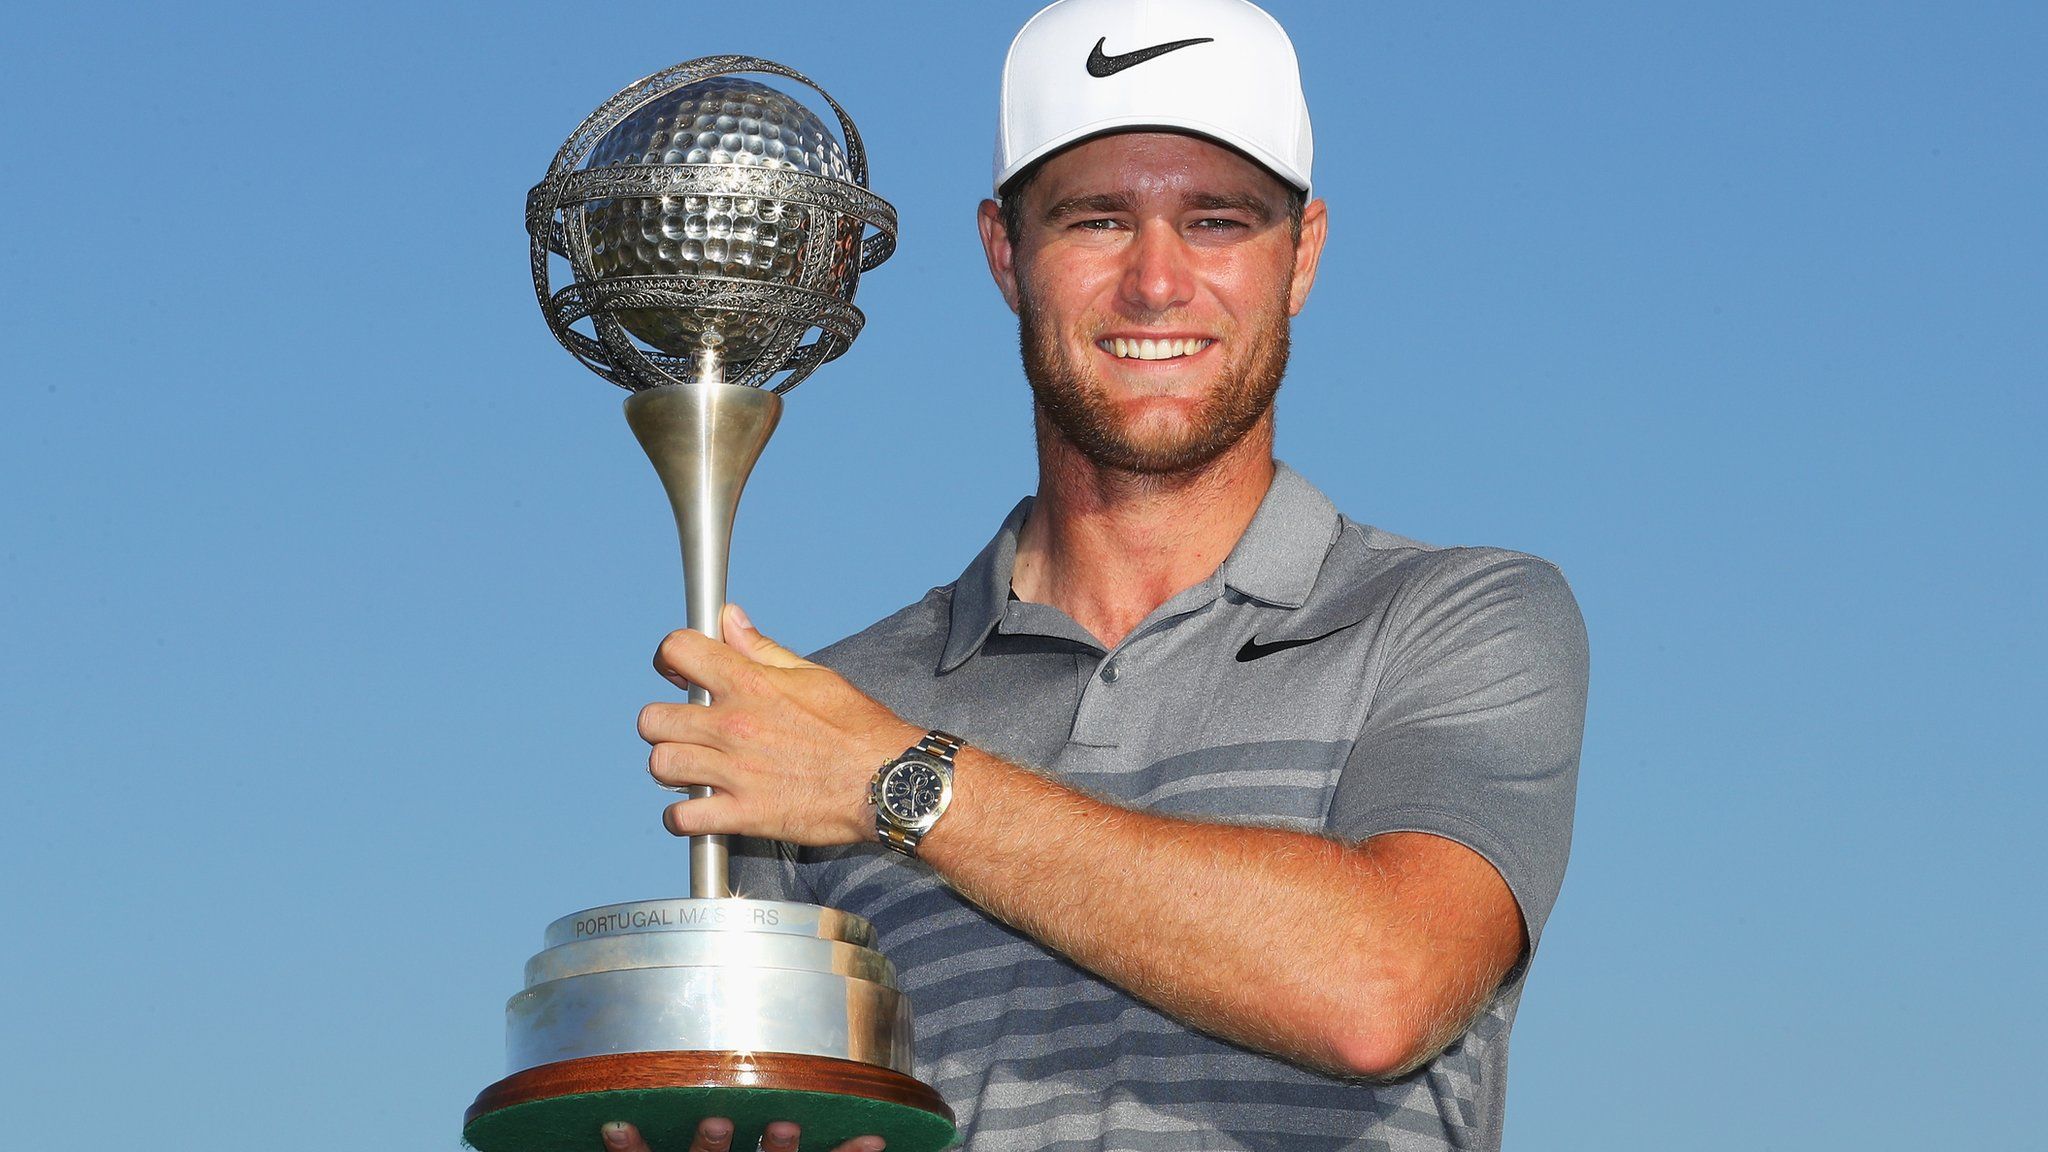 Lucas Bjerregaard with his Portugal Masters trophy